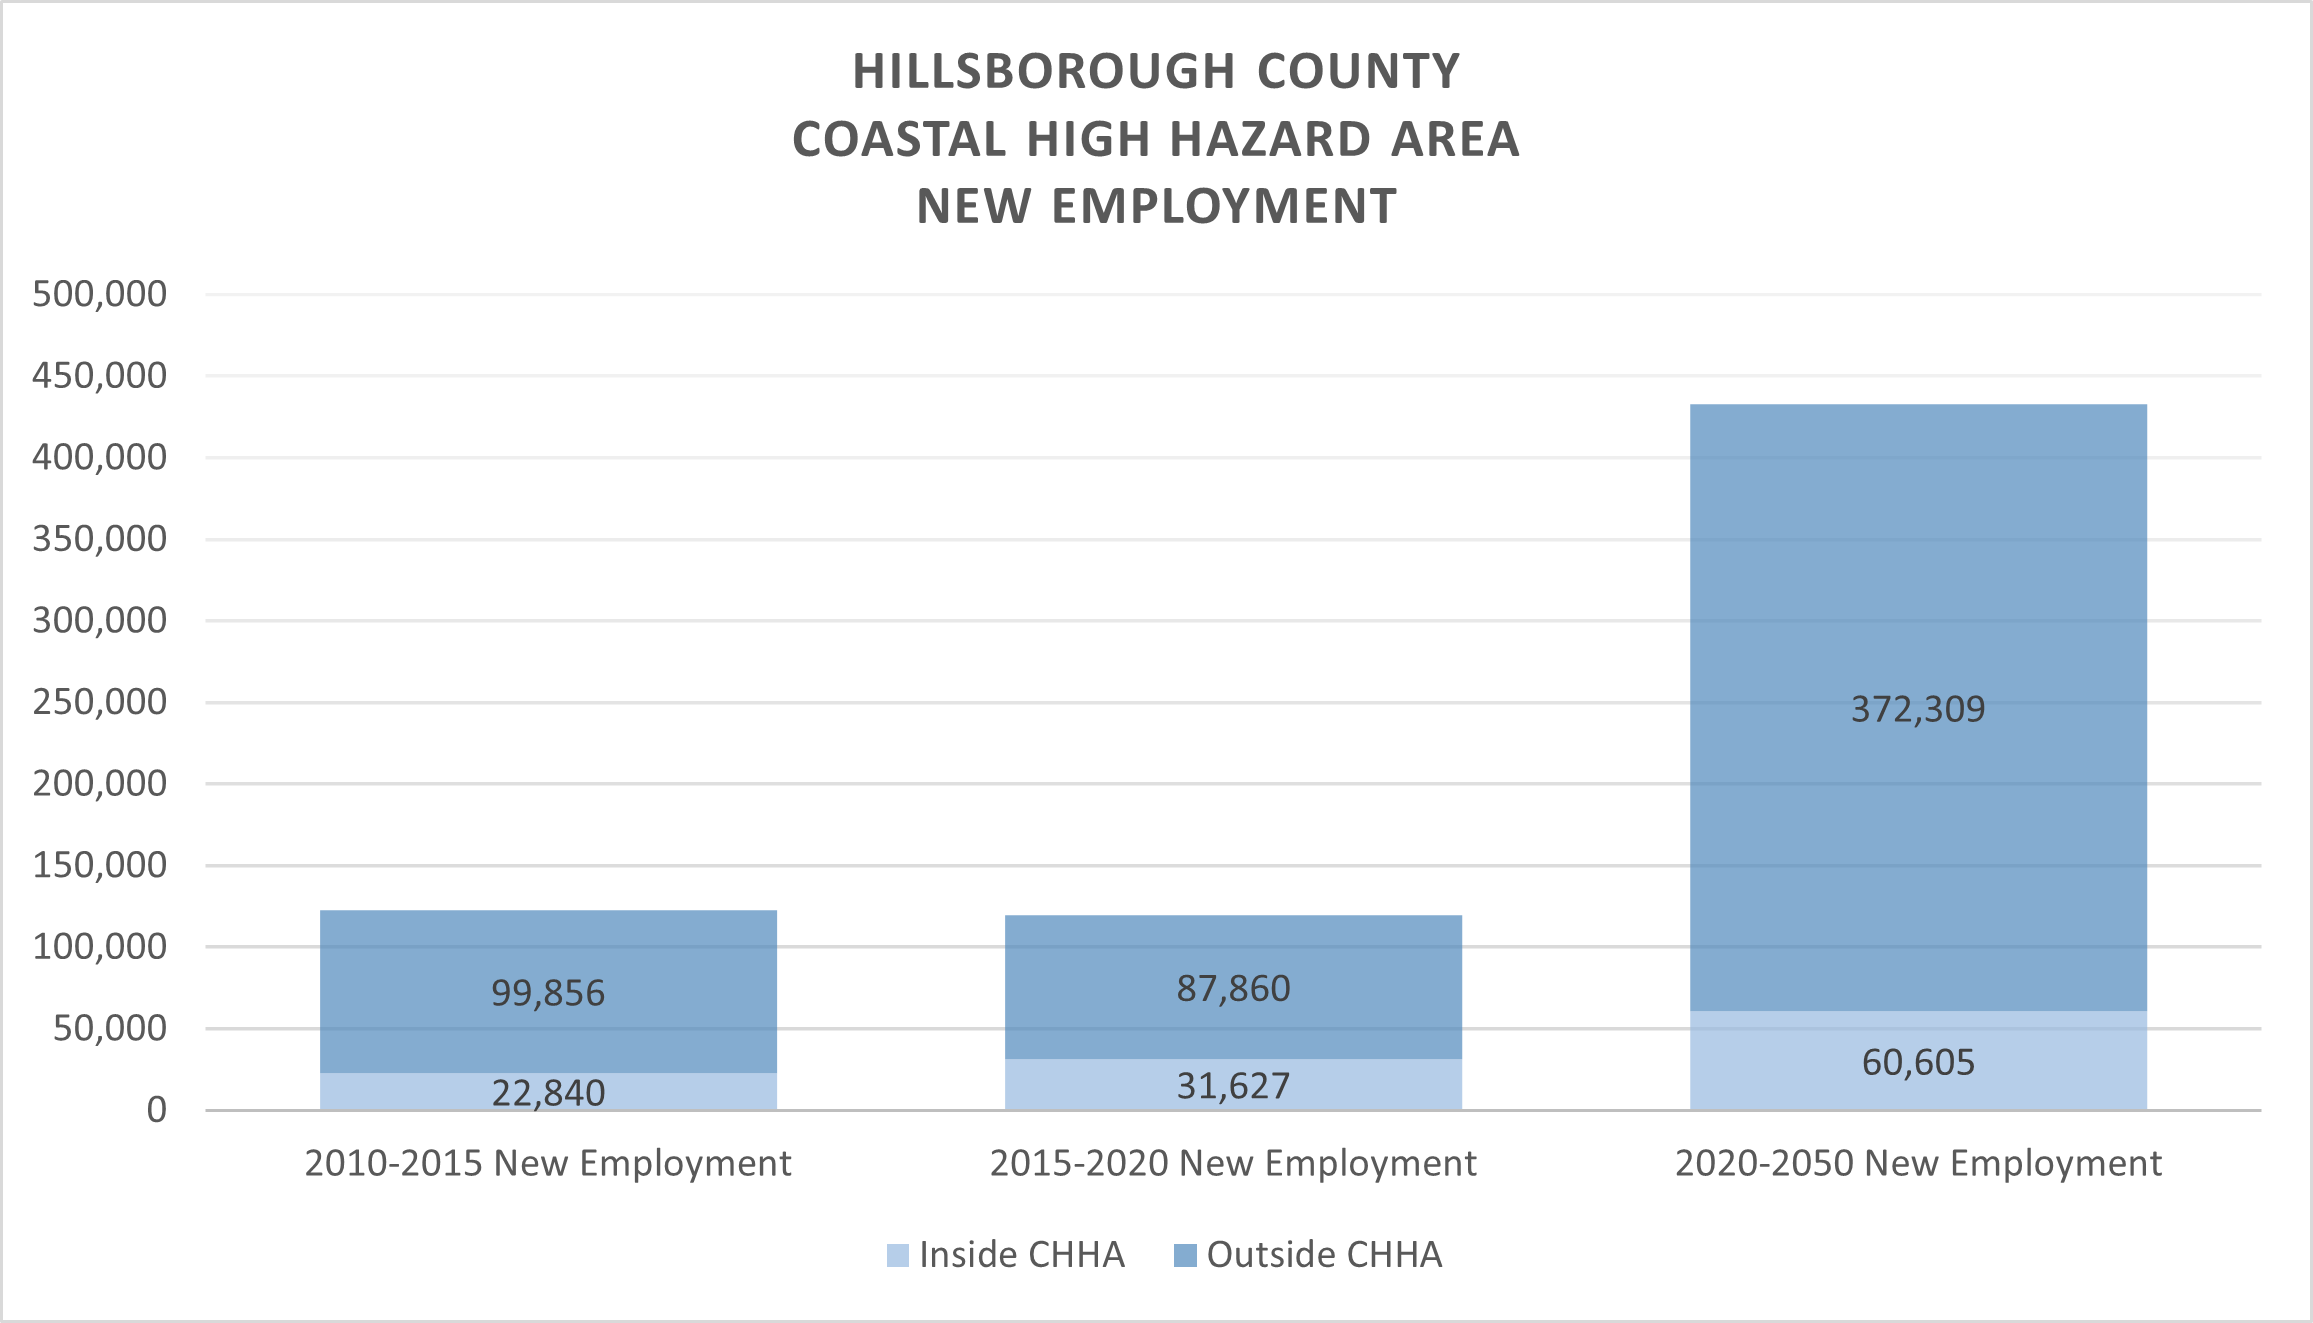 This chart shows Hillsborough County's new jobs inside and outside the CHHA. From 2015 to 2020, 31,627 new jobs moved inside the CHHA and 87,860 new jobs moved outside CHHA. From 2020 to 2050, 60,605 new jobs are expected to move inside the CHHA and 372,309 new jobs are expected to move outside the CHHA.